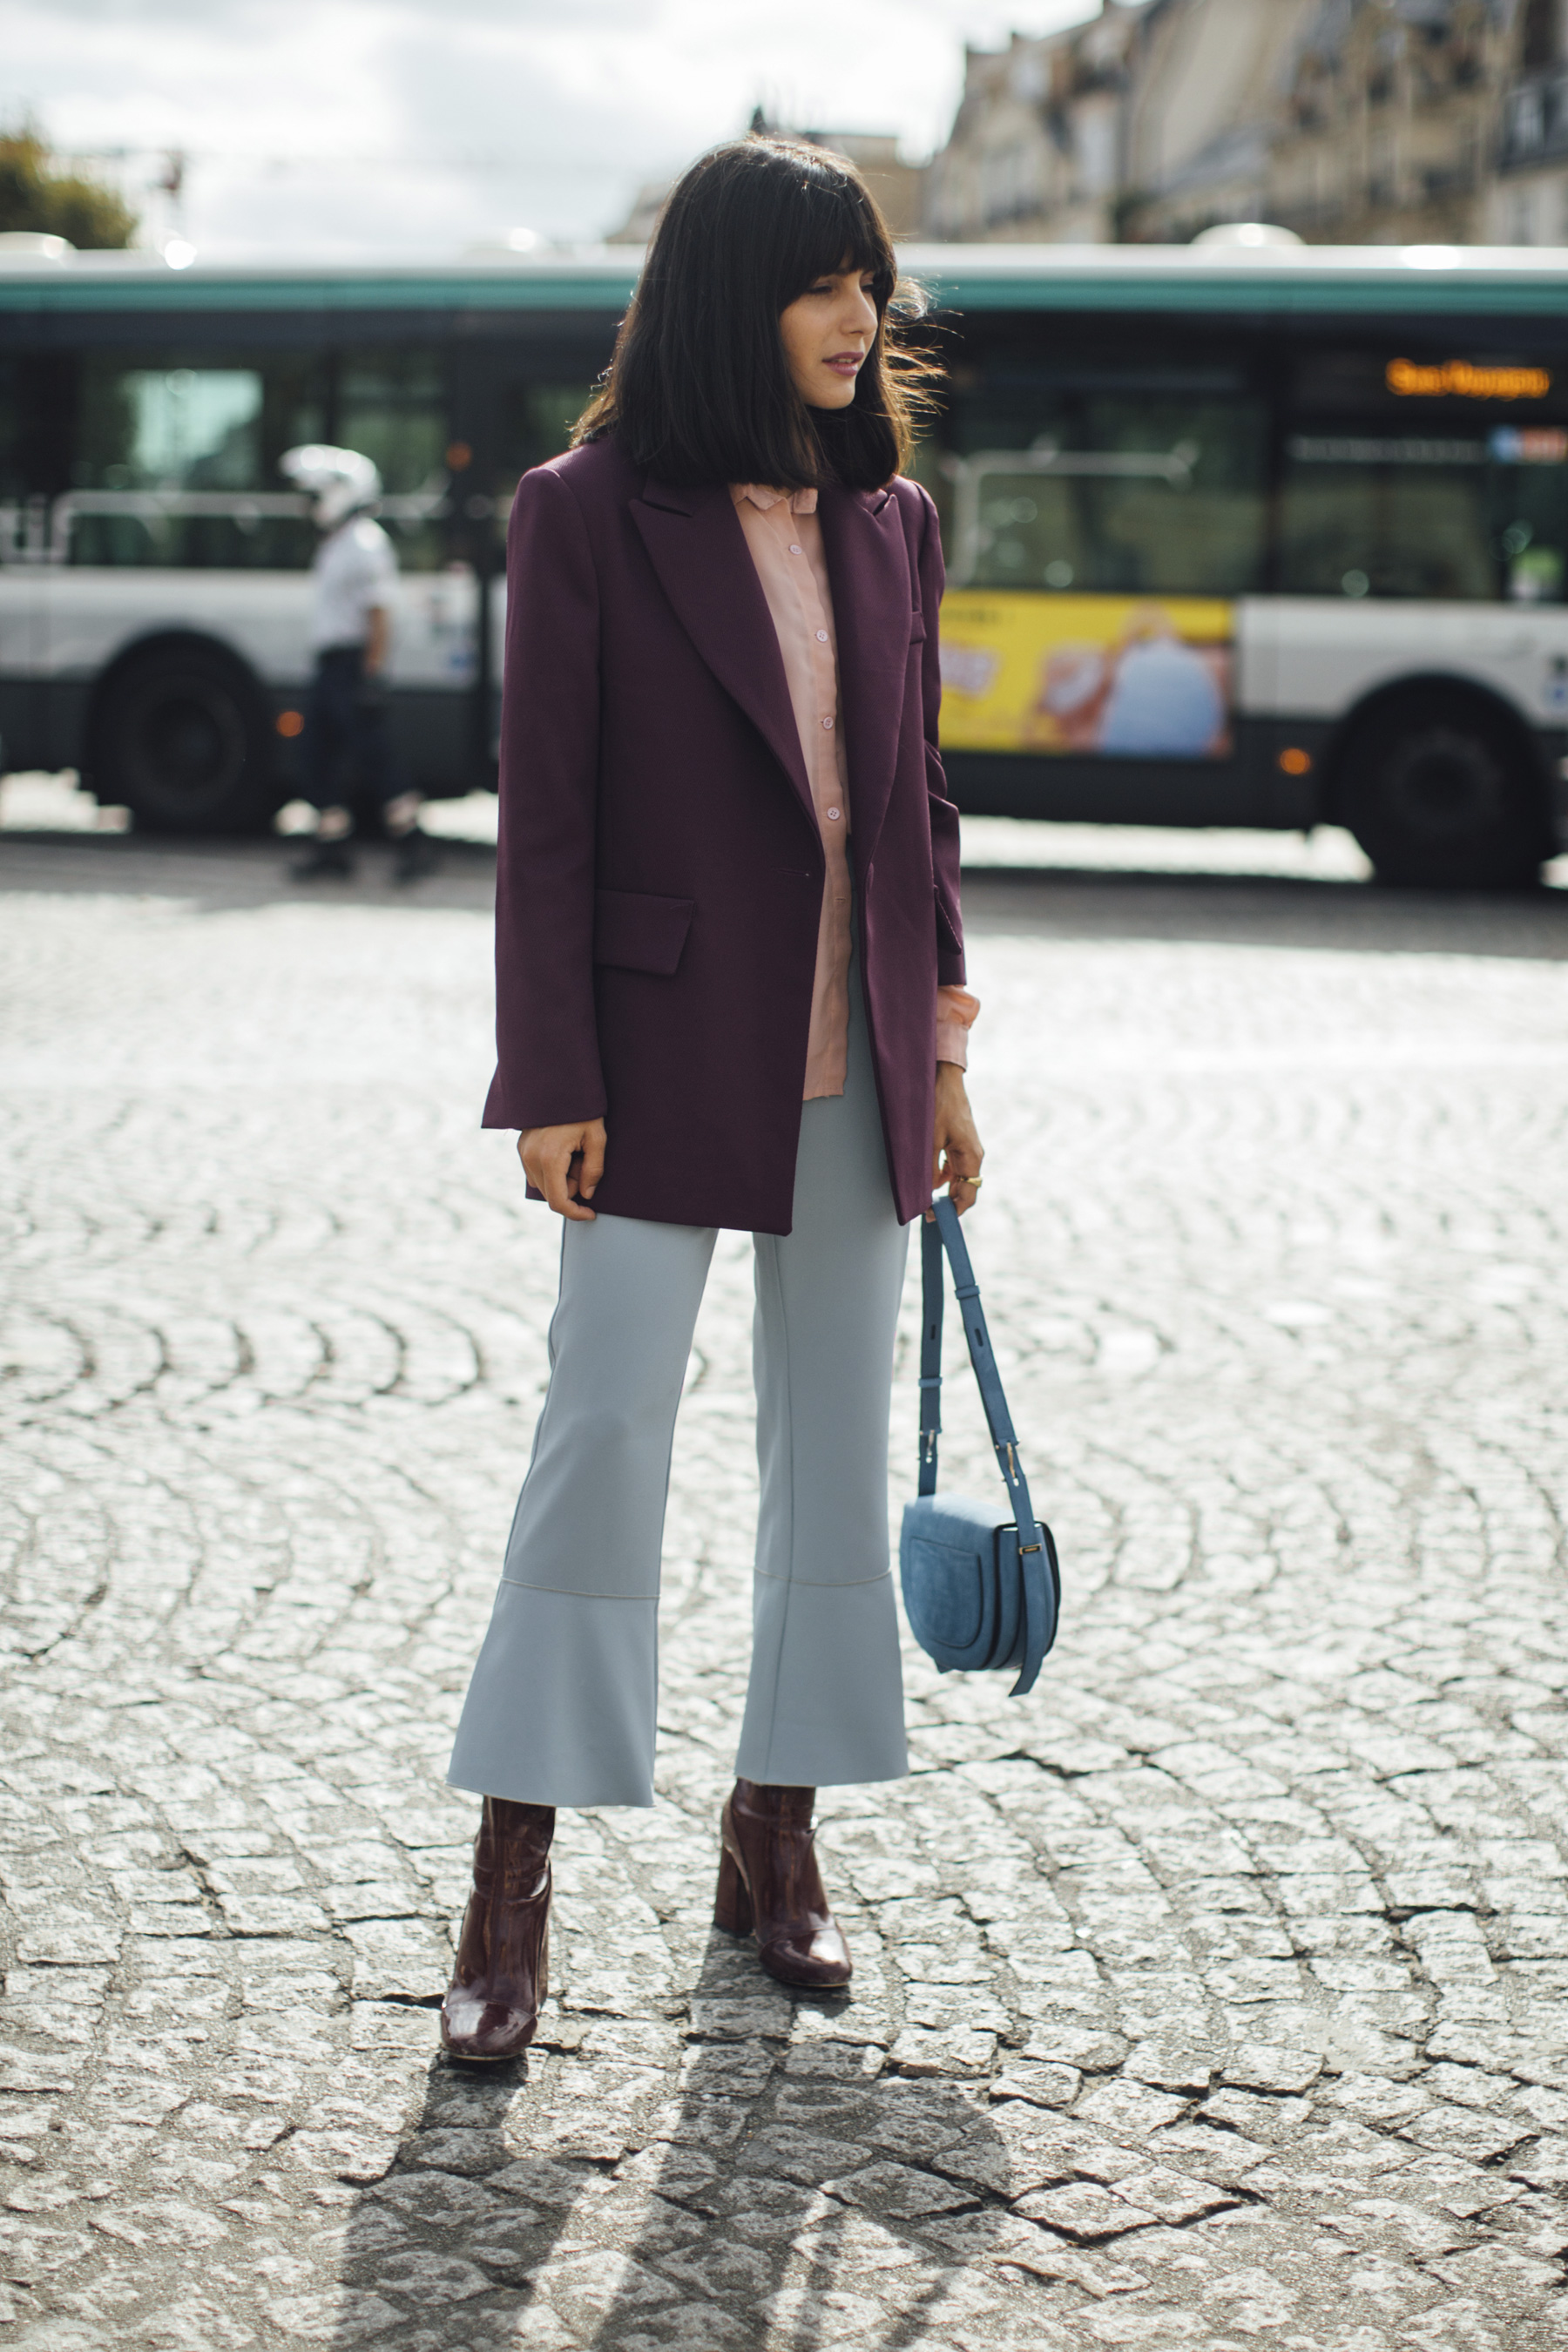 6 Winter Work Outfits 2023: What to Wear to Work in Winter